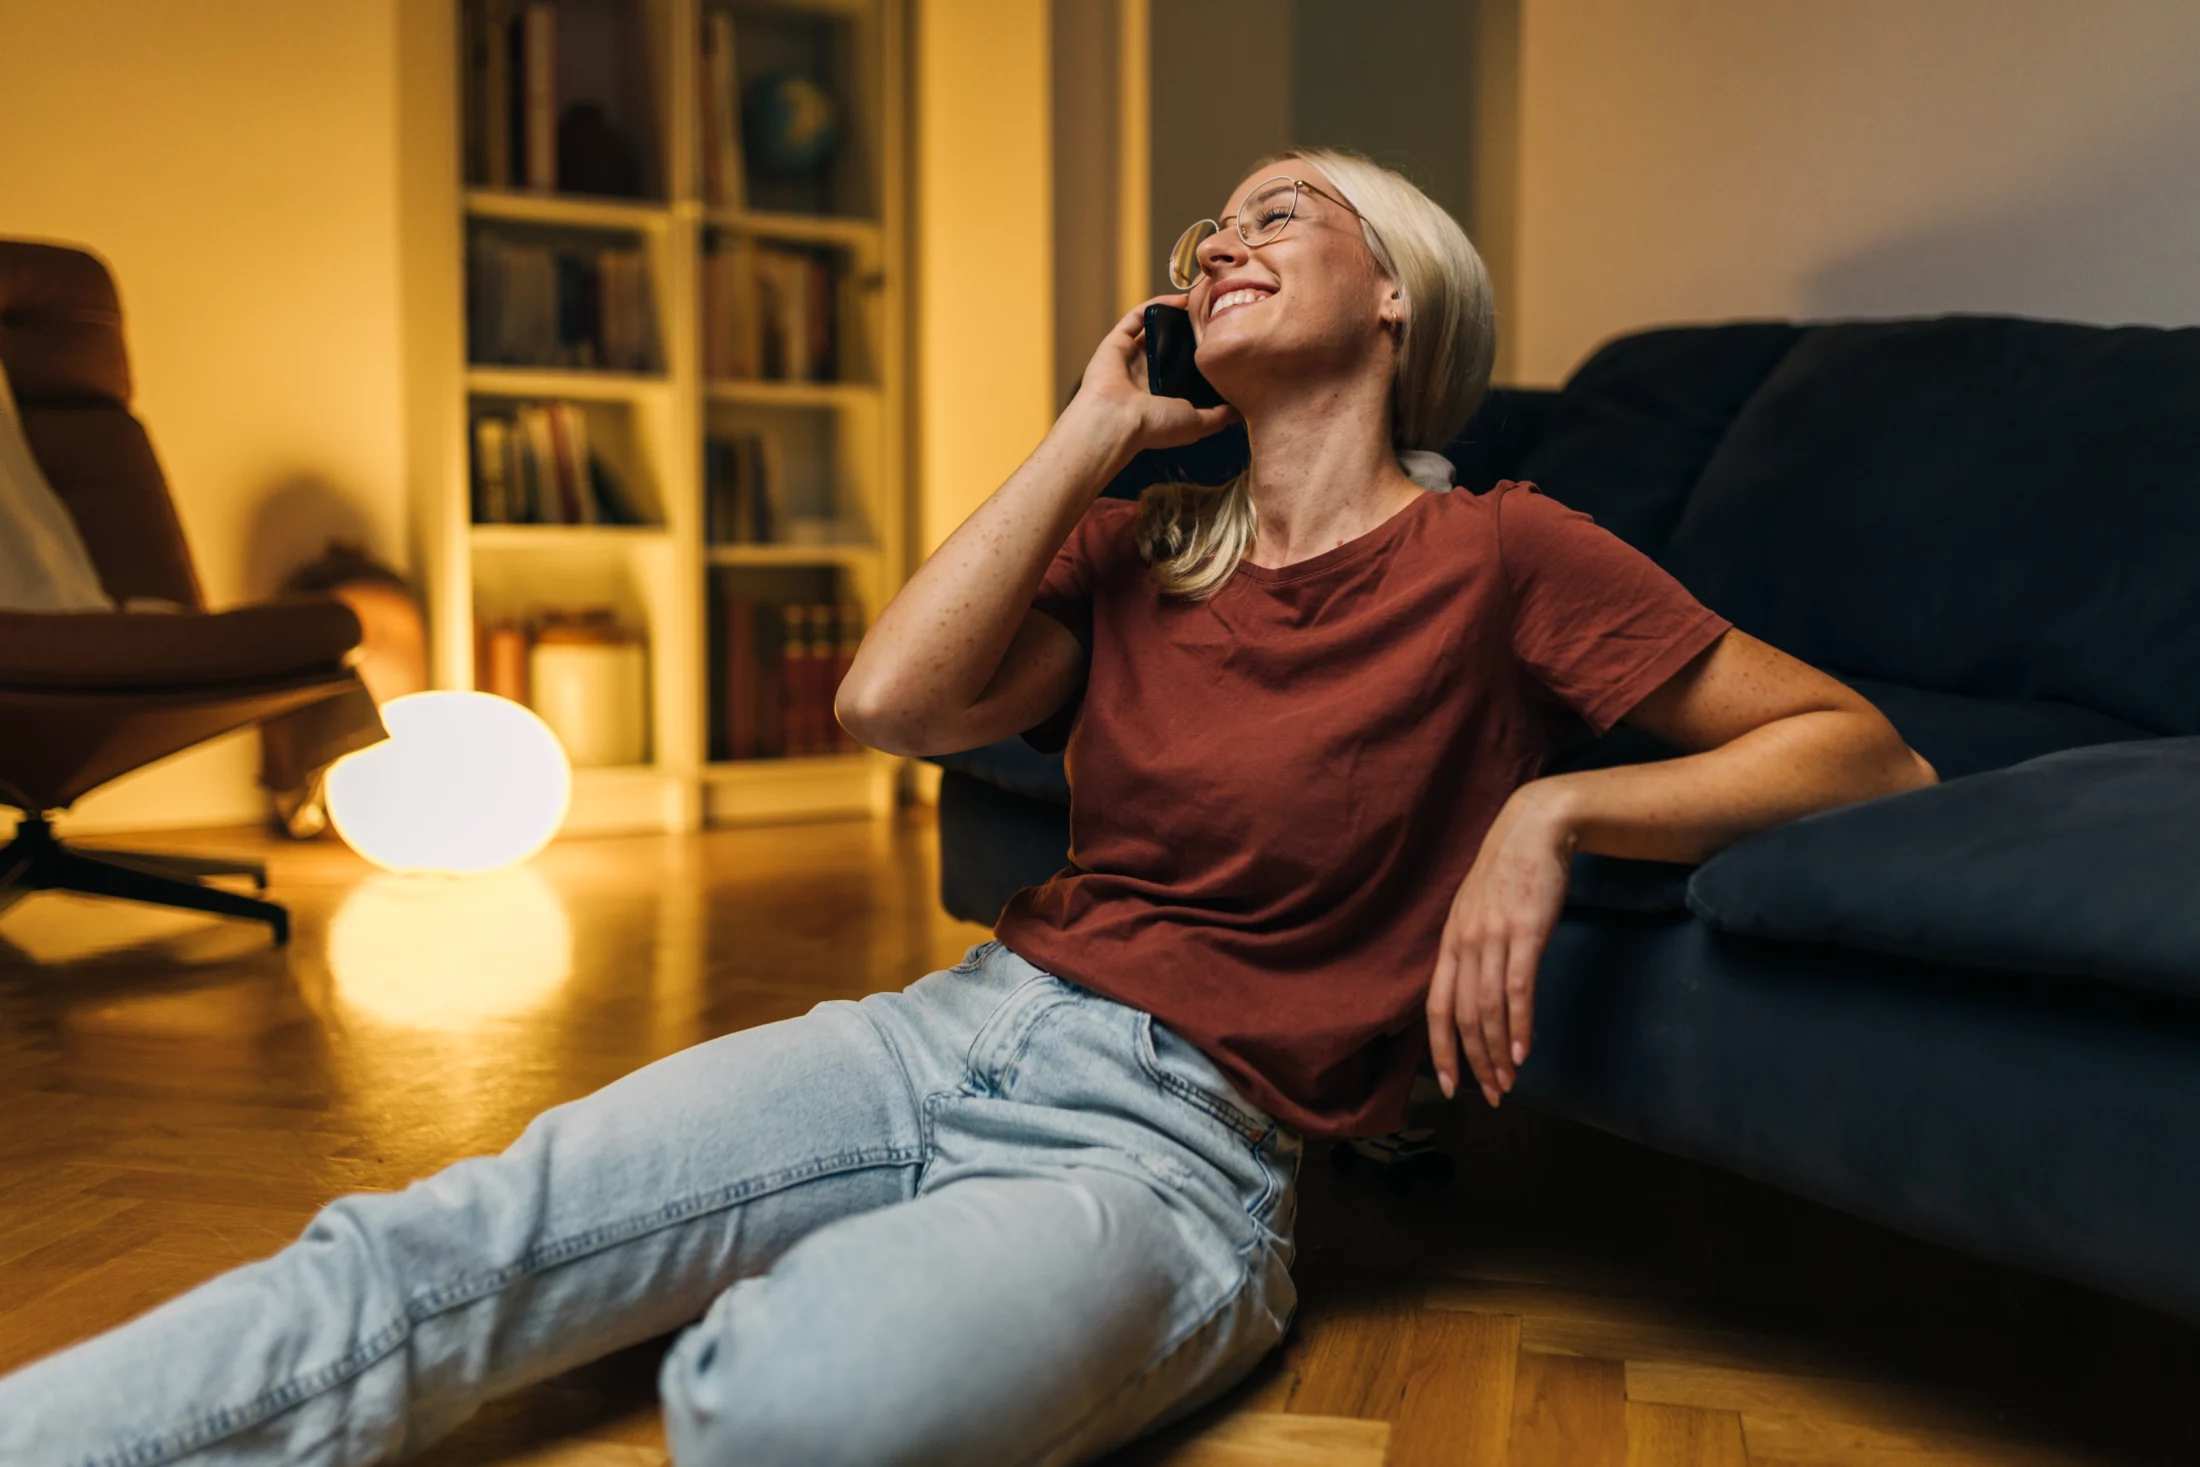 no spend weekend ideas: call a loved one on the phone | Swoosh Finance